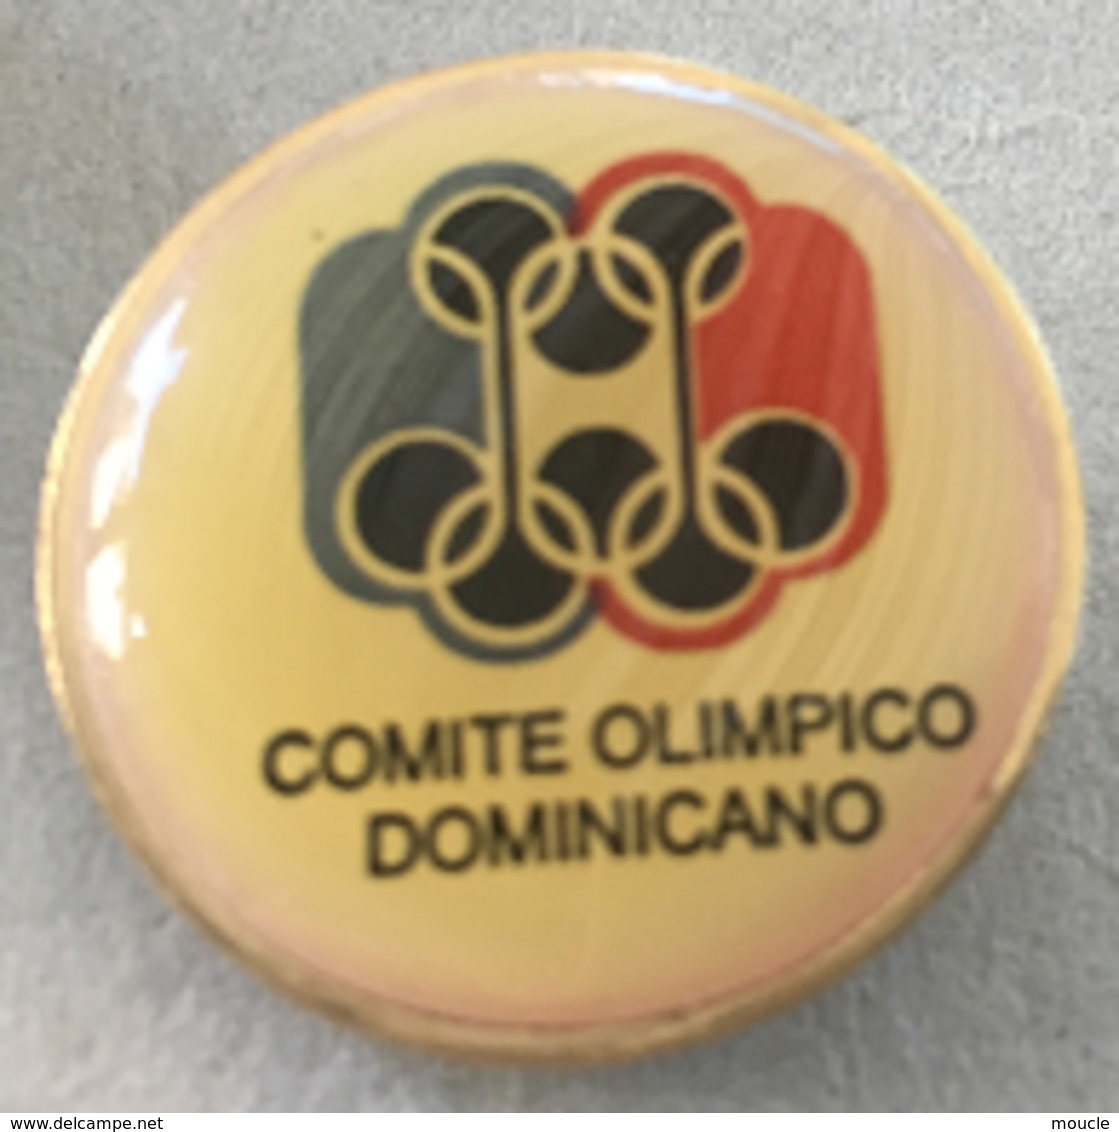 JEUX OLYMPIQUES - COMITE OLYMPIQUE DOMINICAINE - COMITE OLIMPICO DOMINICANO  -     (20) - Olympic Games